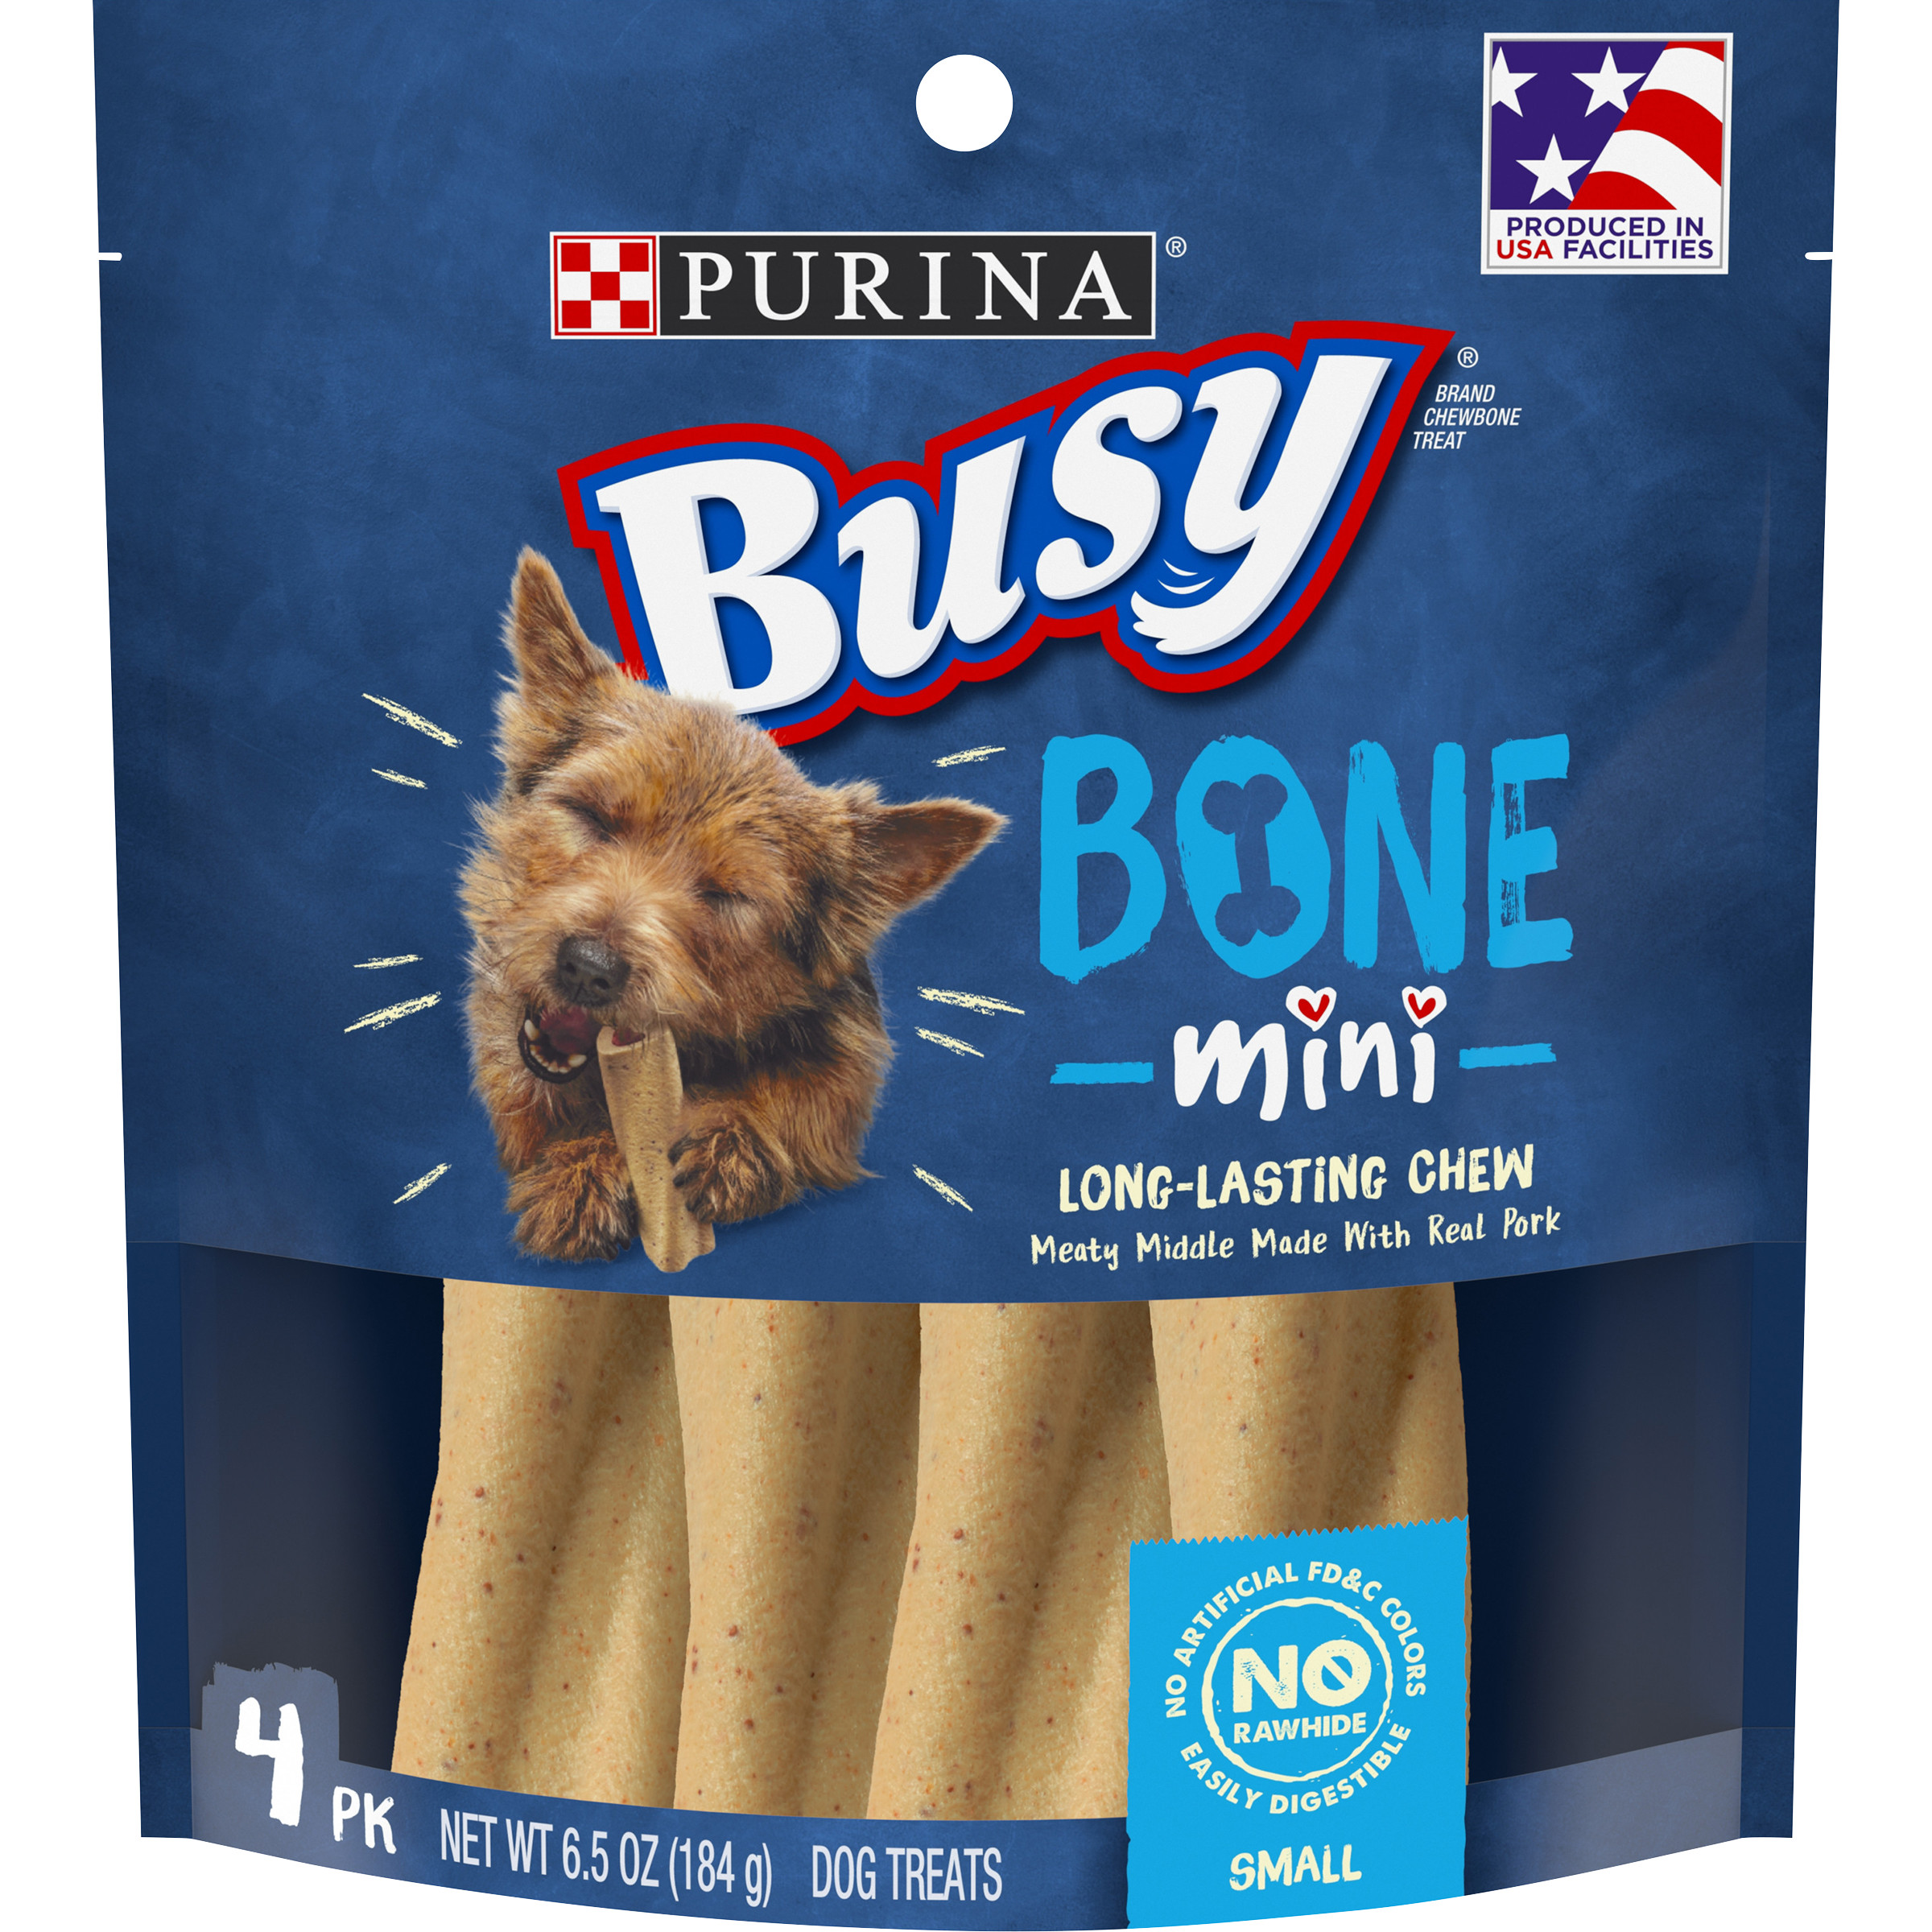 Purina Busy Small Breed Dog Bones, Mini, 4 ct. Pouch - image 1 of 11